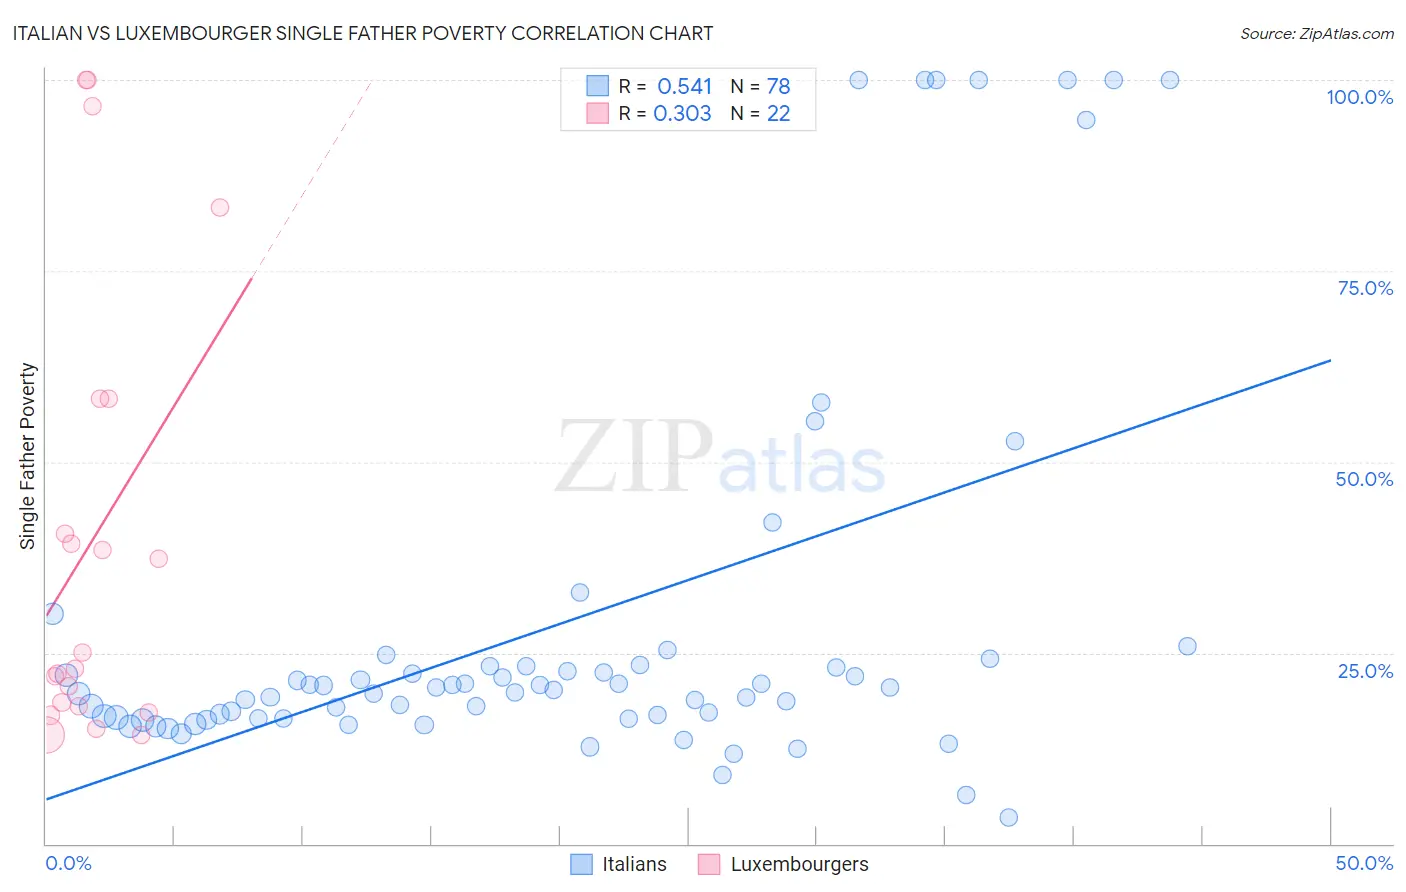 Italian vs Luxembourger Single Father Poverty